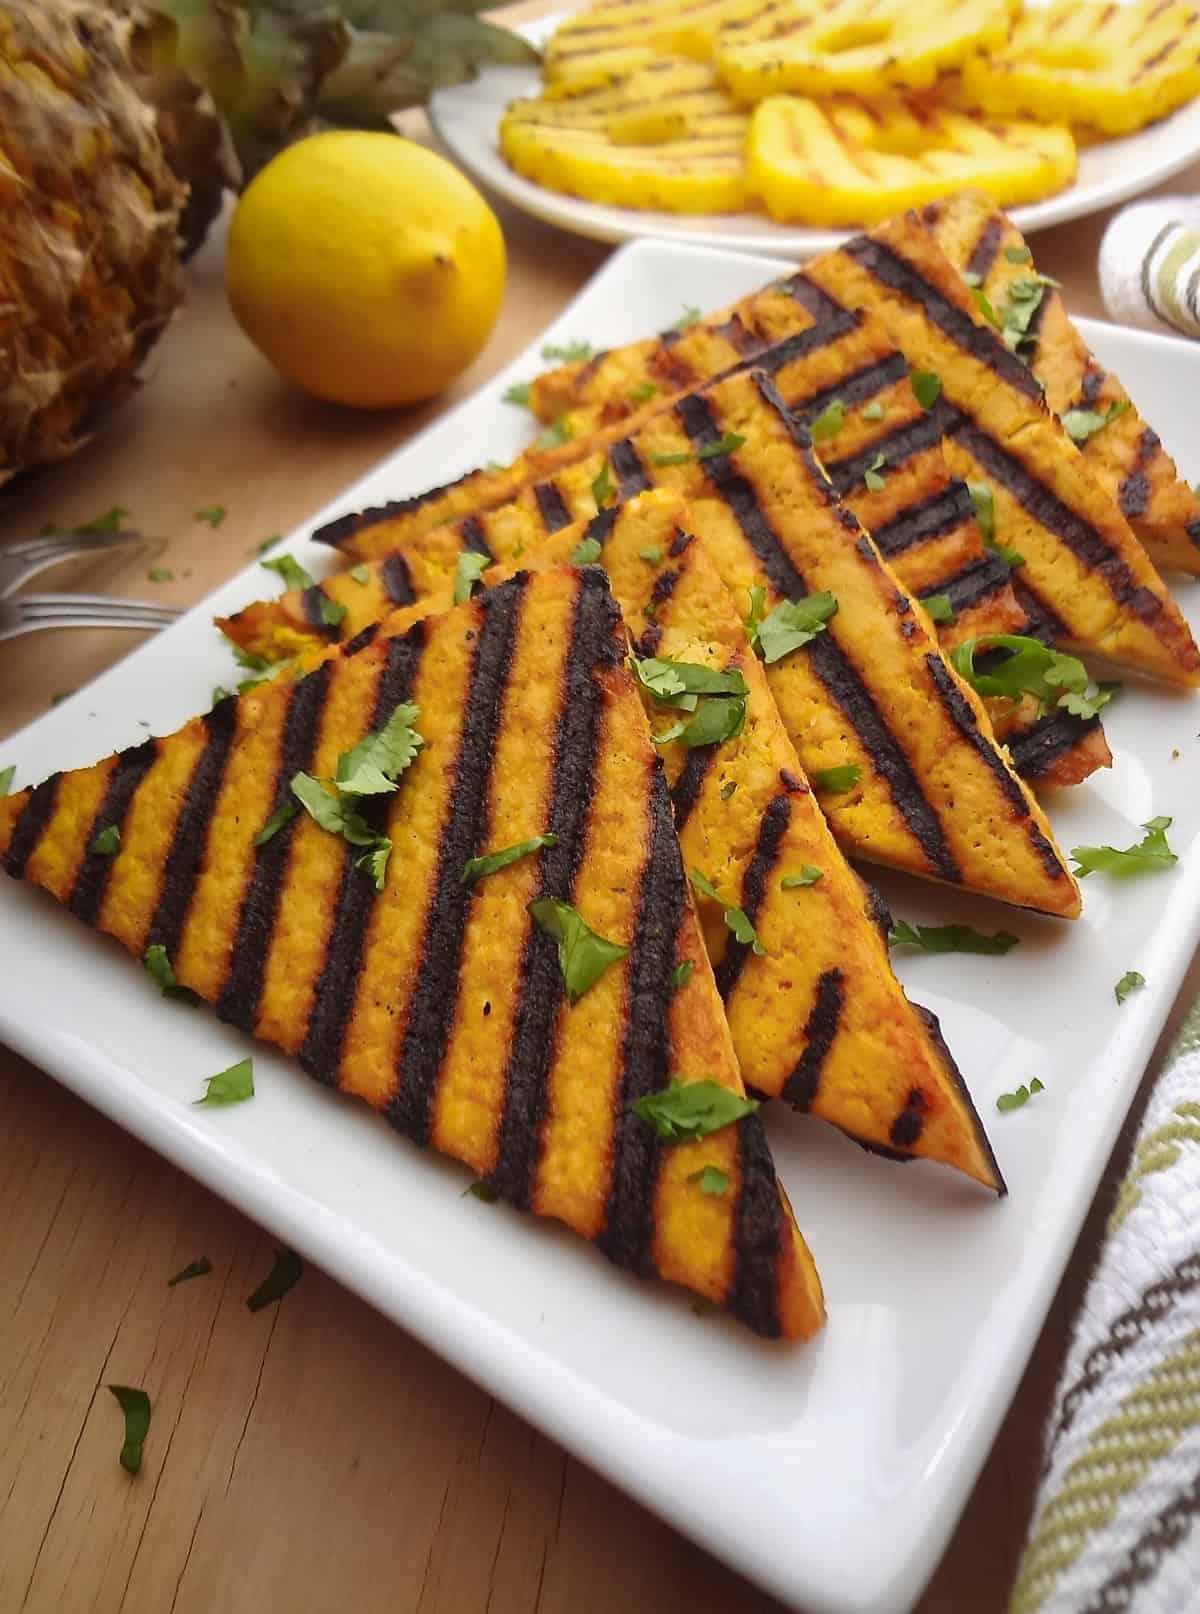 Six tofu slices with grill marks on a white plate topped with finely chopped cilantro.